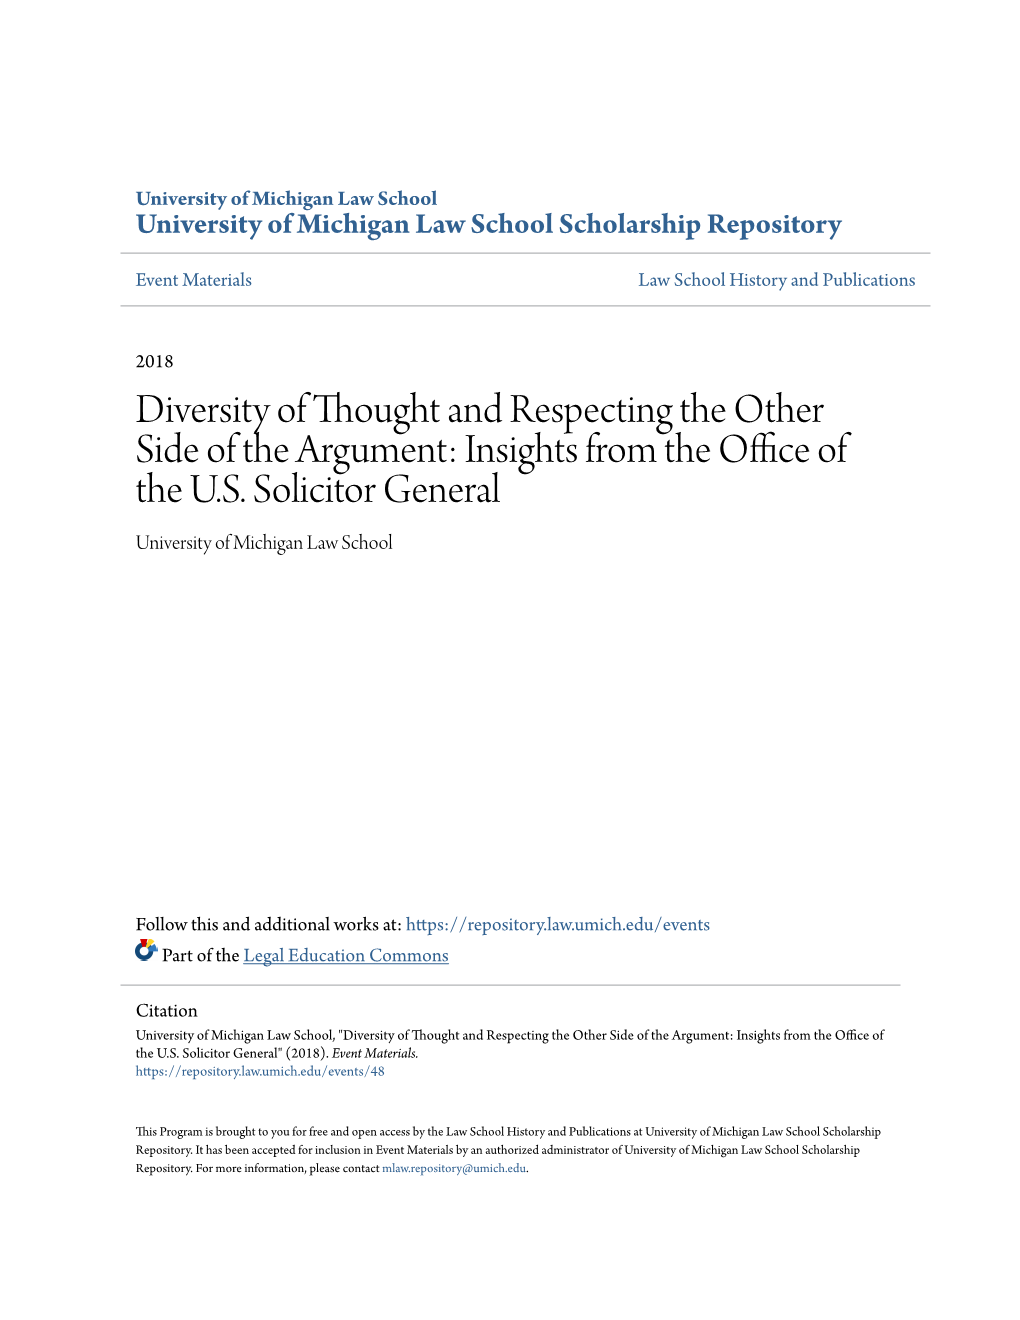 Diversity of Thought and Respecting the Other Side of the Argument: Insights from the Office of the U.S